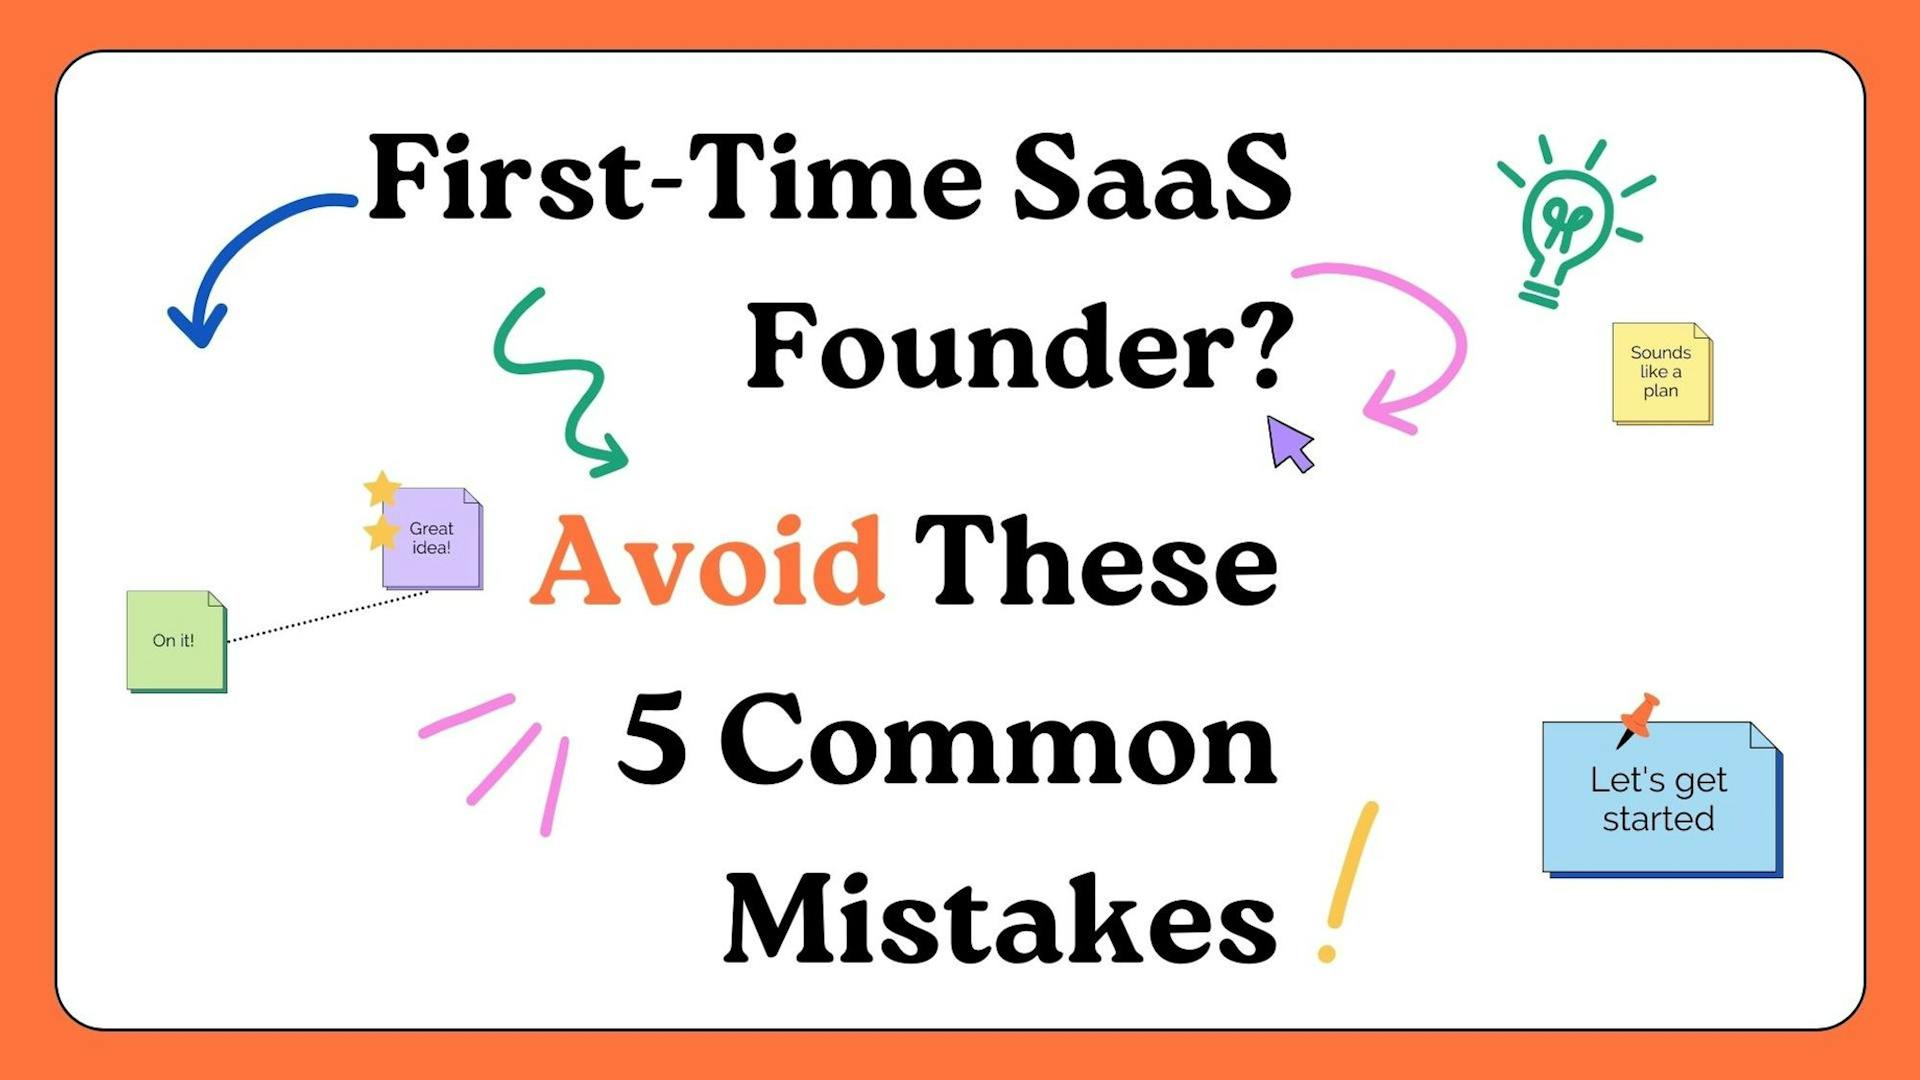 Cover Image for First-Time SaaS Founder? Avoid These 5 Common Mistakes